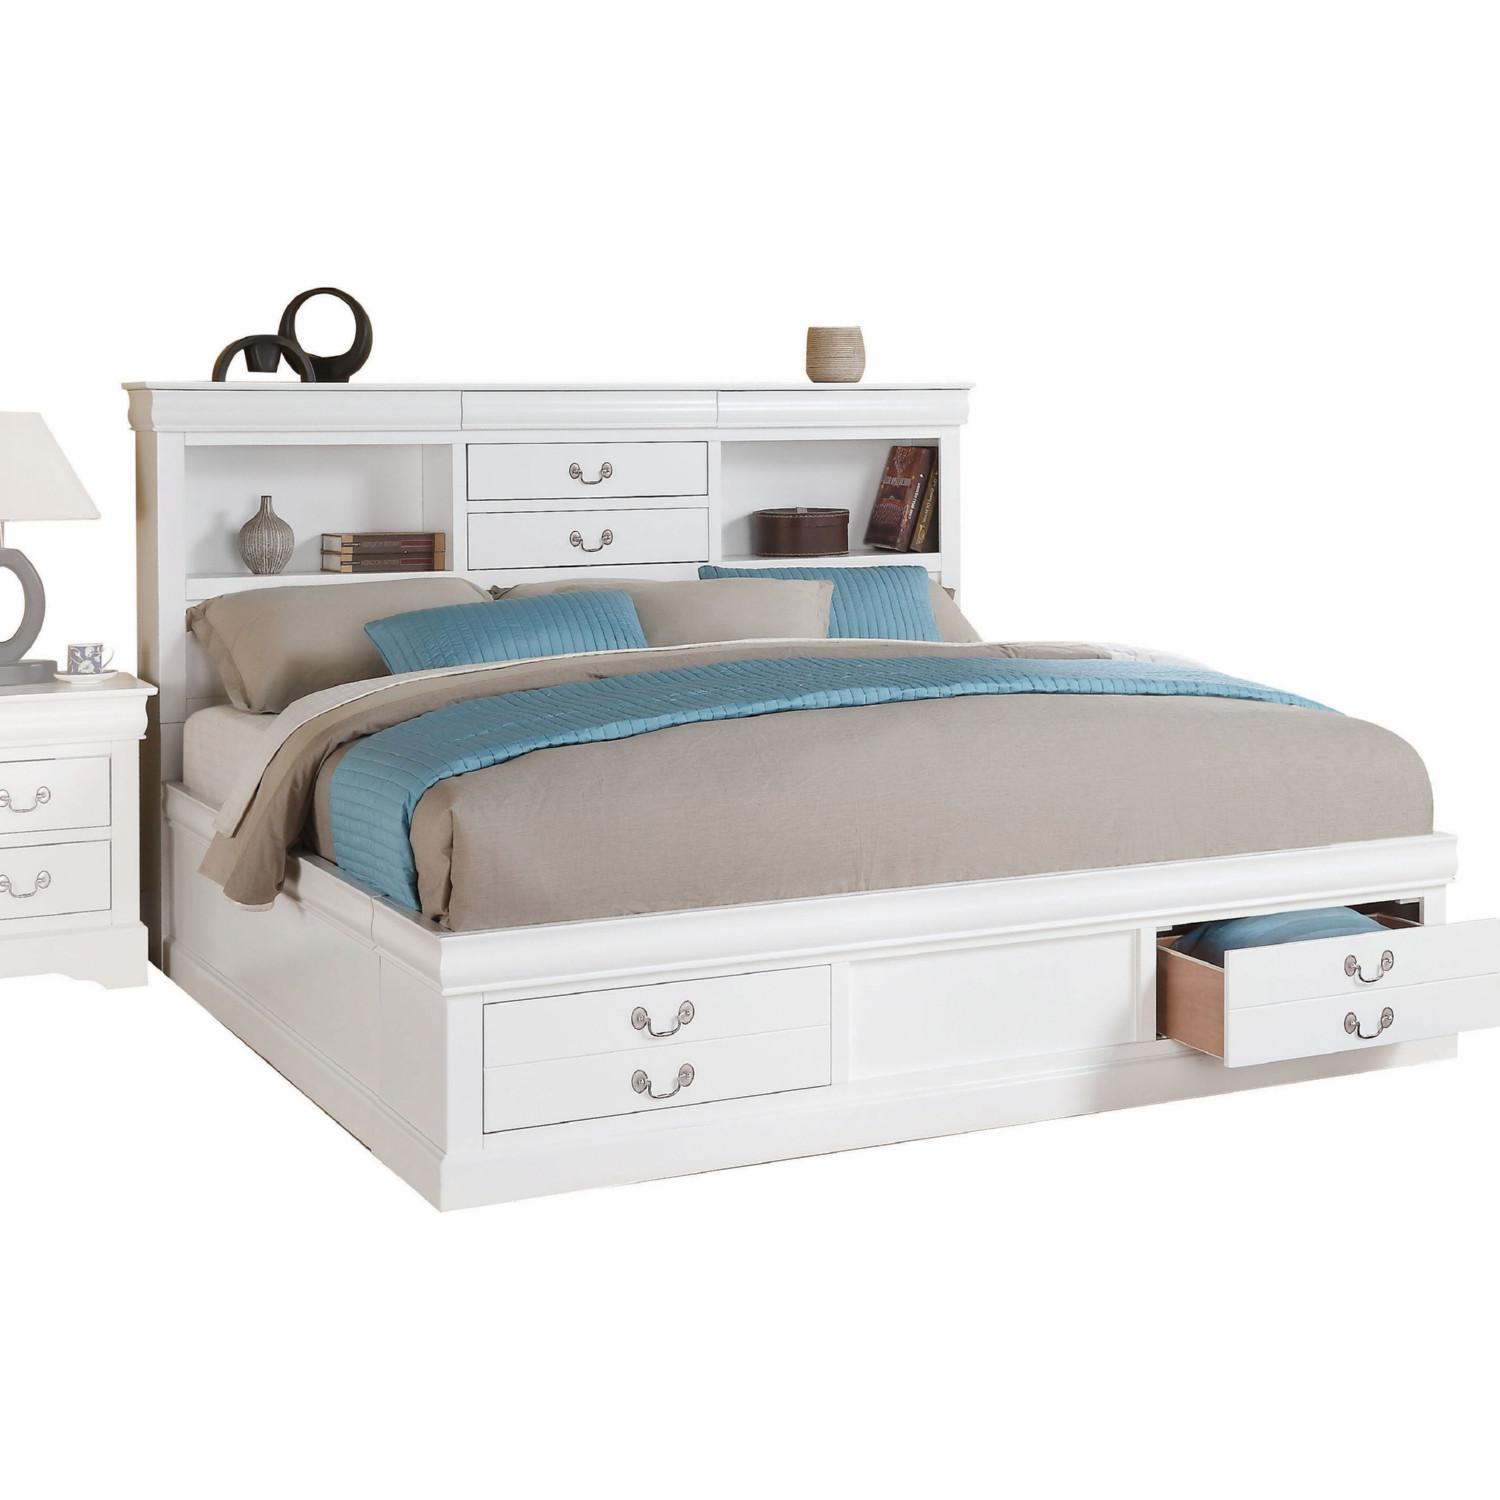 Acme Louis Philippe lll King Storage Bed in Real White 24487EK